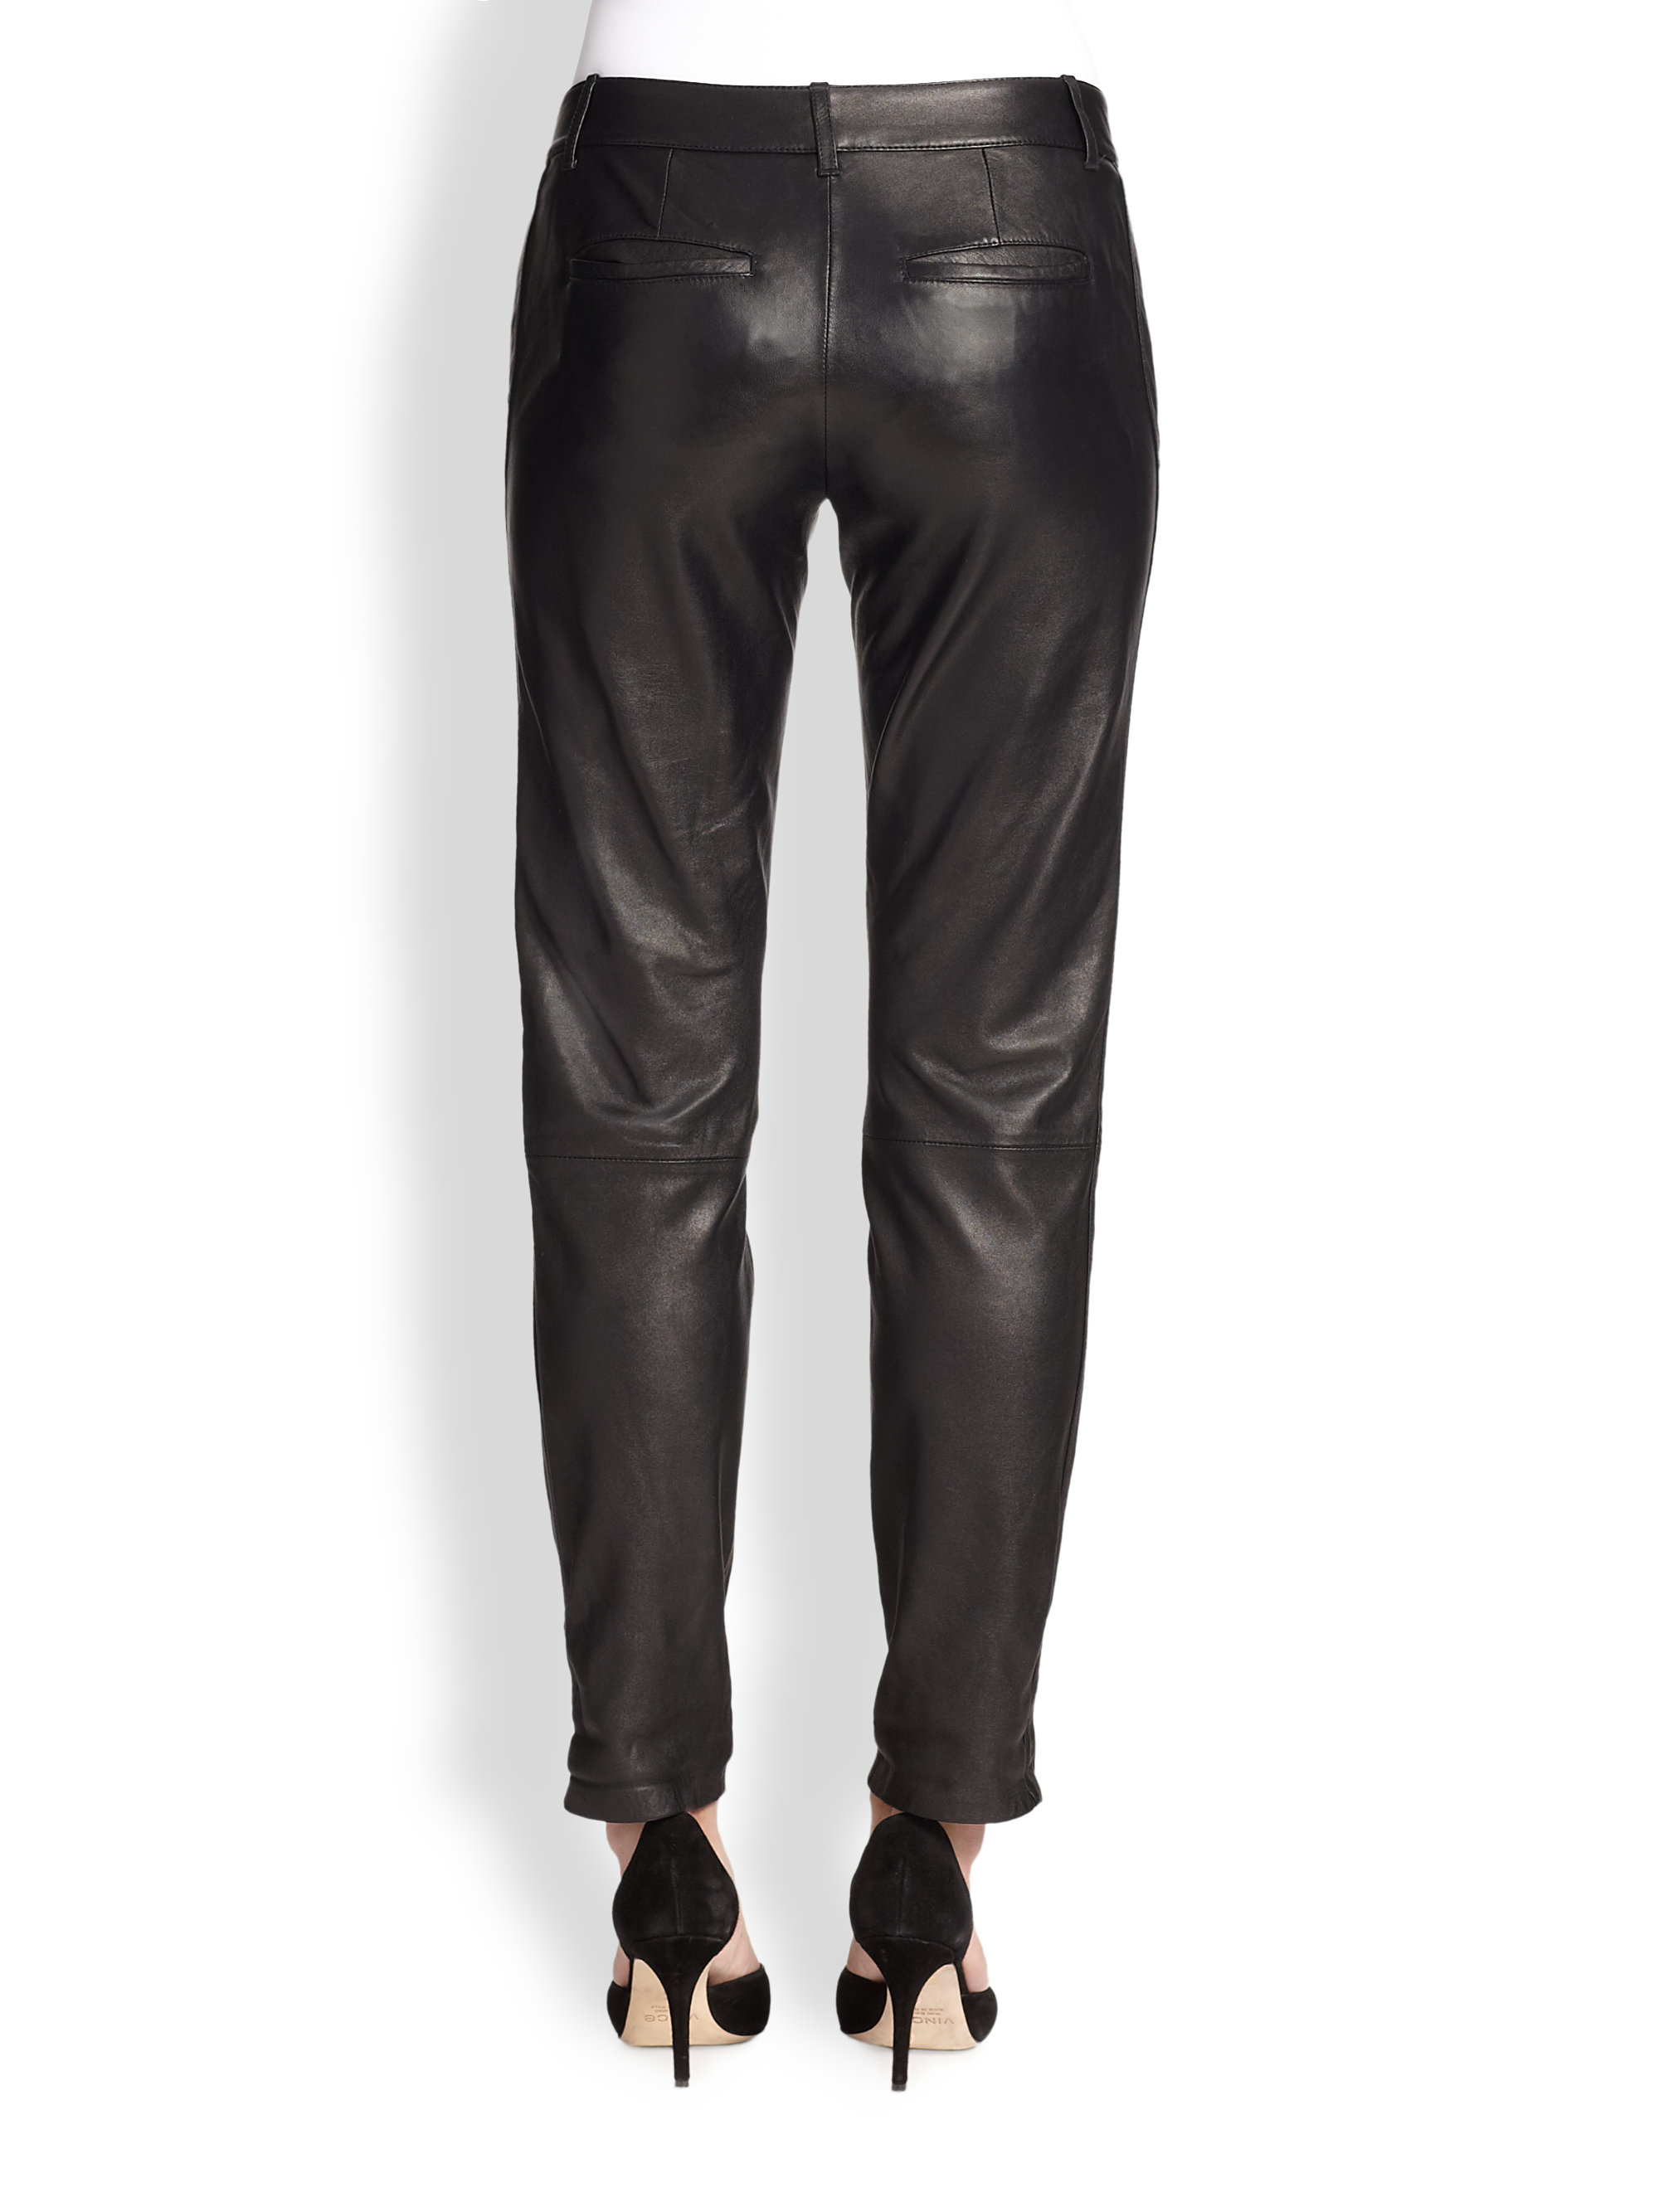 Lyst - Vince Leather Straight-Leg Pants in Black